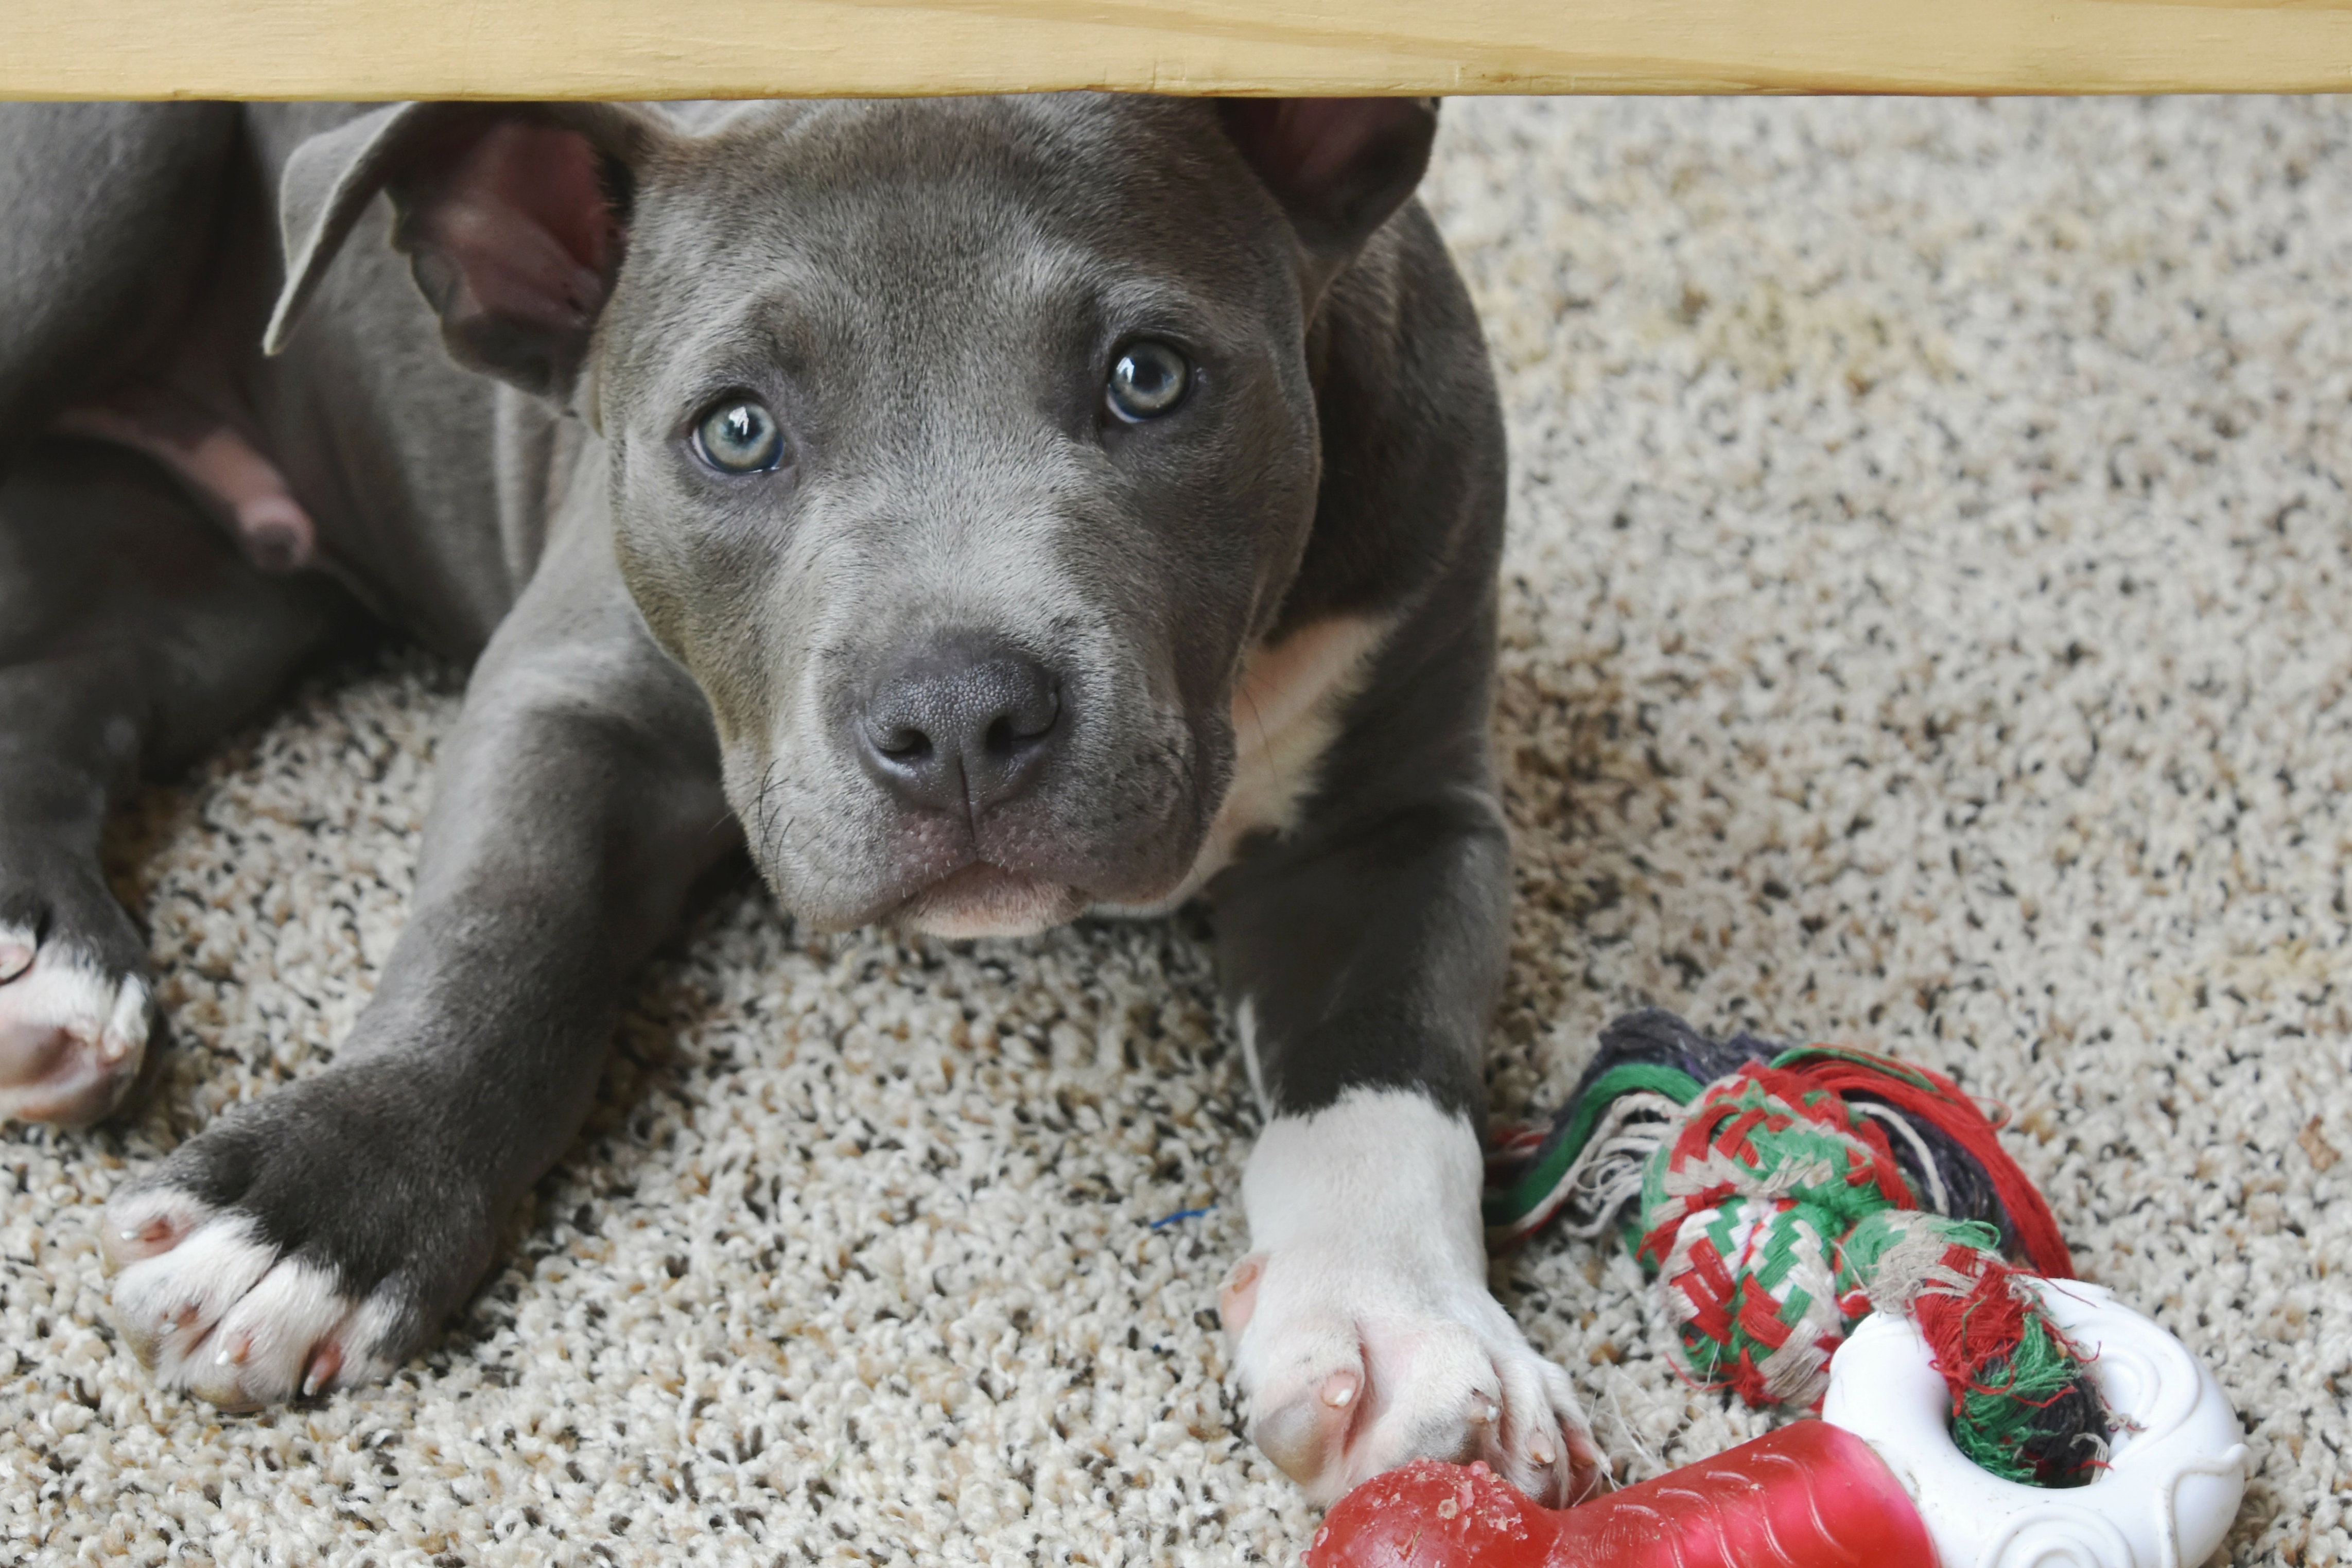 New puppy? Now's the time to consider pet insurance.